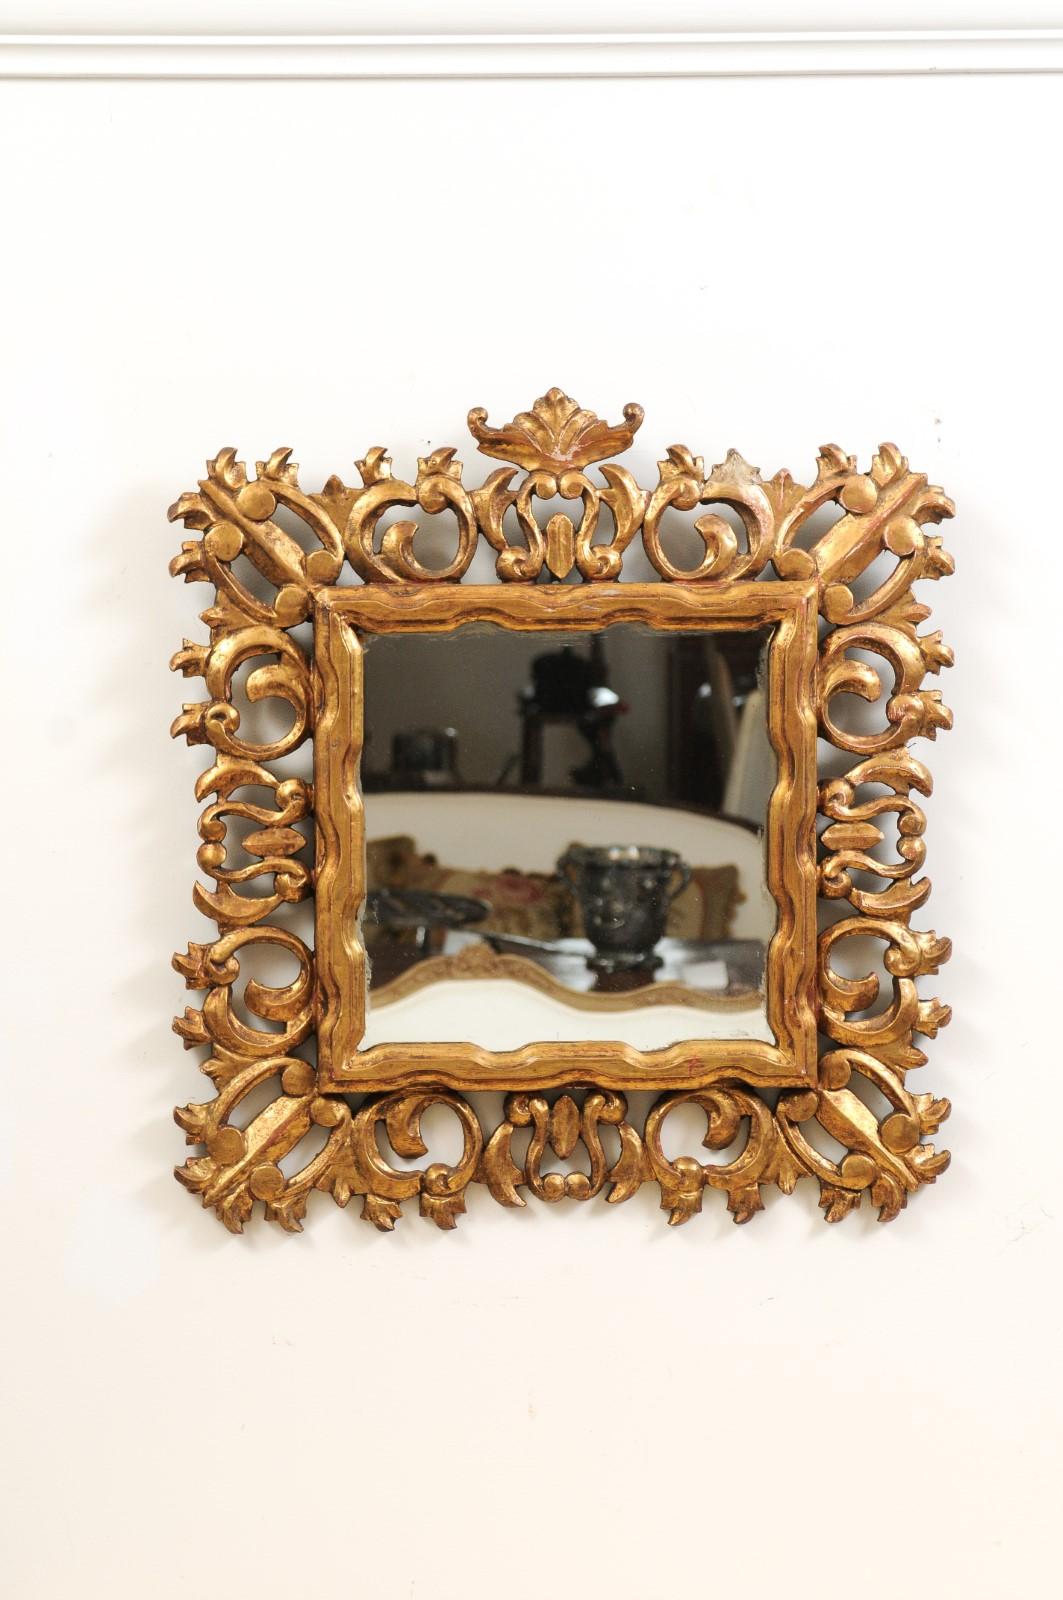 Italian Florentine 20th Century Carved Giltwood Mirror with C-Scrolls and Foliage Motifs For Sale